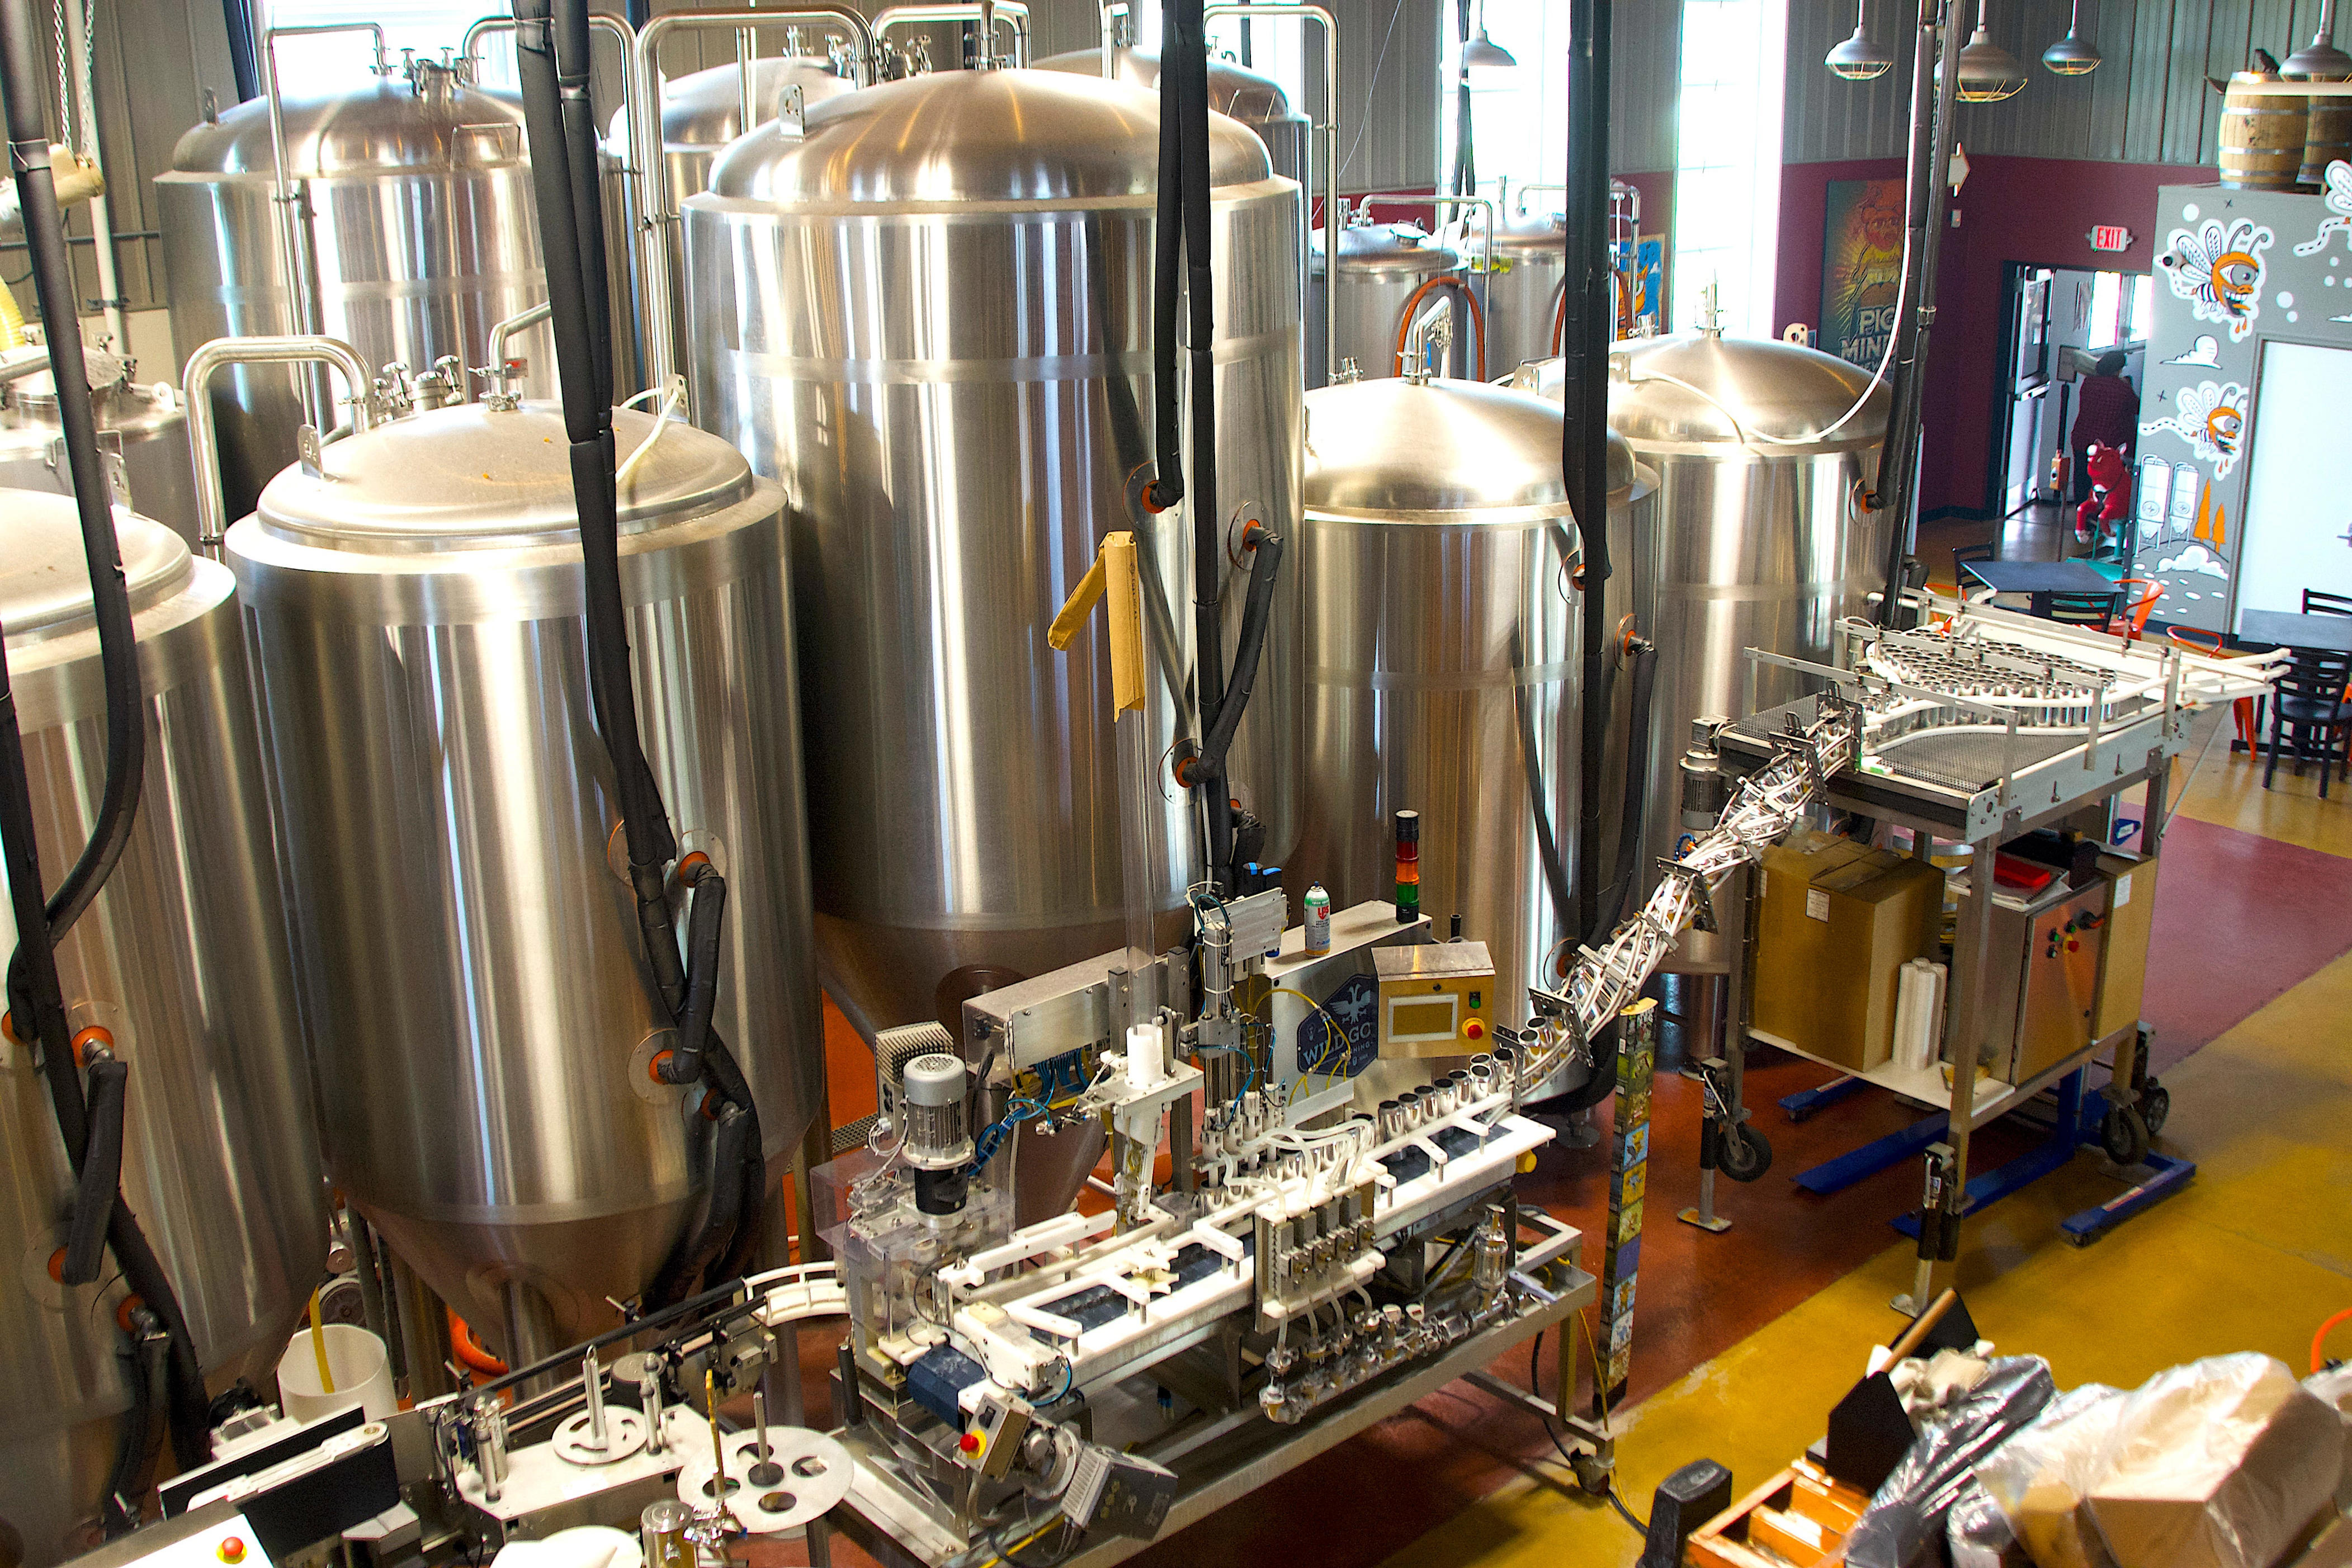 <p>Number of craft breweries operating in 2021: 98.</p> <p>Number of craft breweries operating in 2023: 108.</p> <p>Economic Impact Rank in U.S.: 38th.</p>